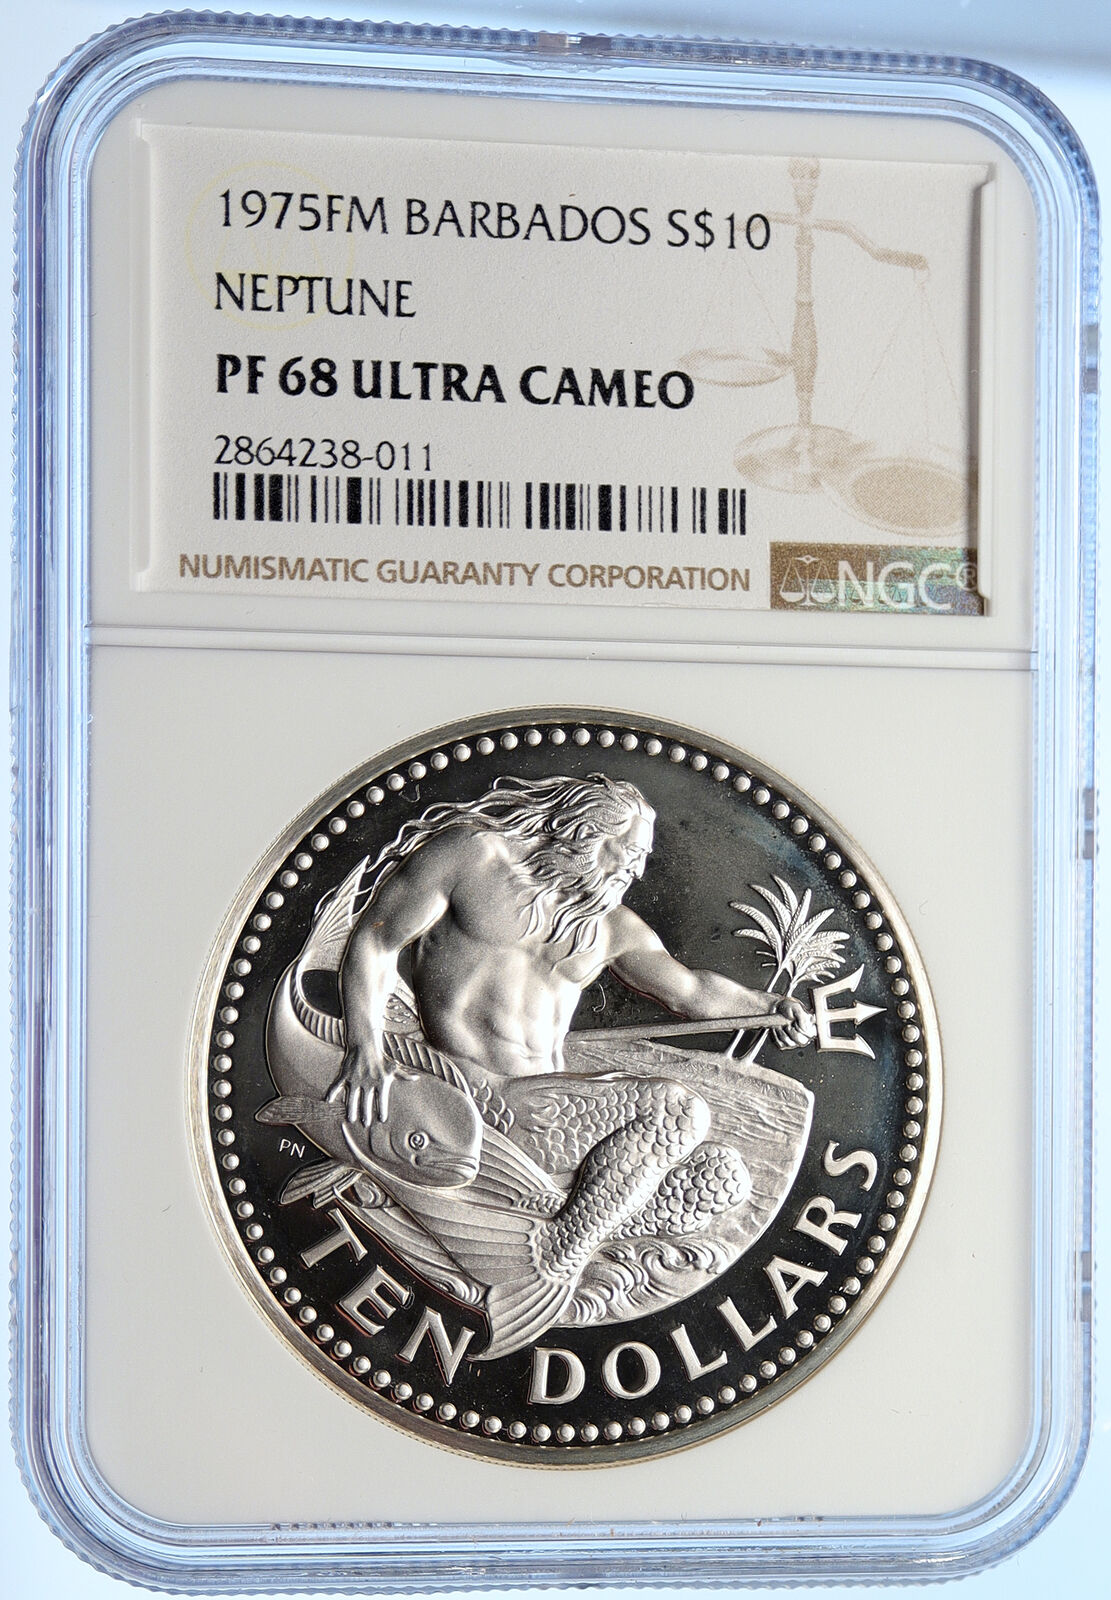 1975 BARBADOS Huge Old Genuine Proof Silver 10 Dollars Coin NEPTUNE NGC i106372